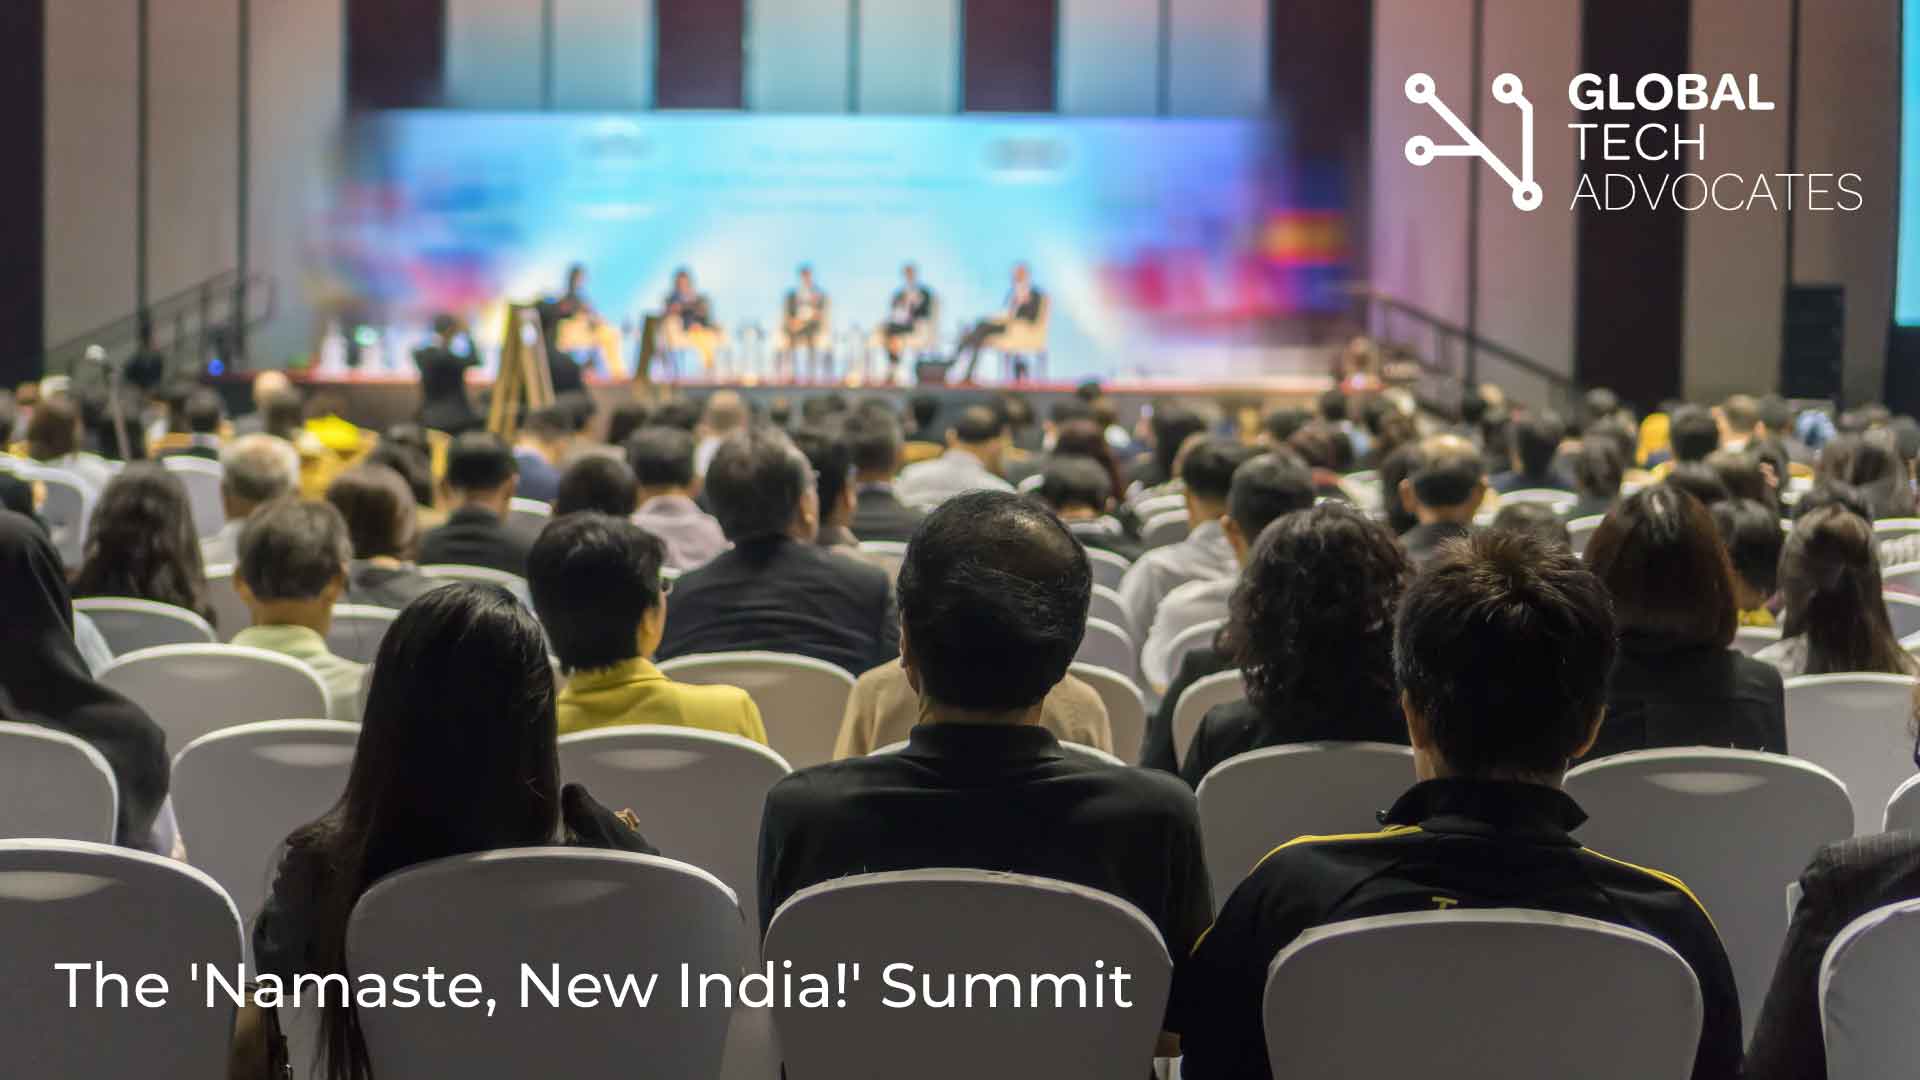 Nurturing a global tech community: India successfully hosts the second Global Tech Advocates (GTA) Summit